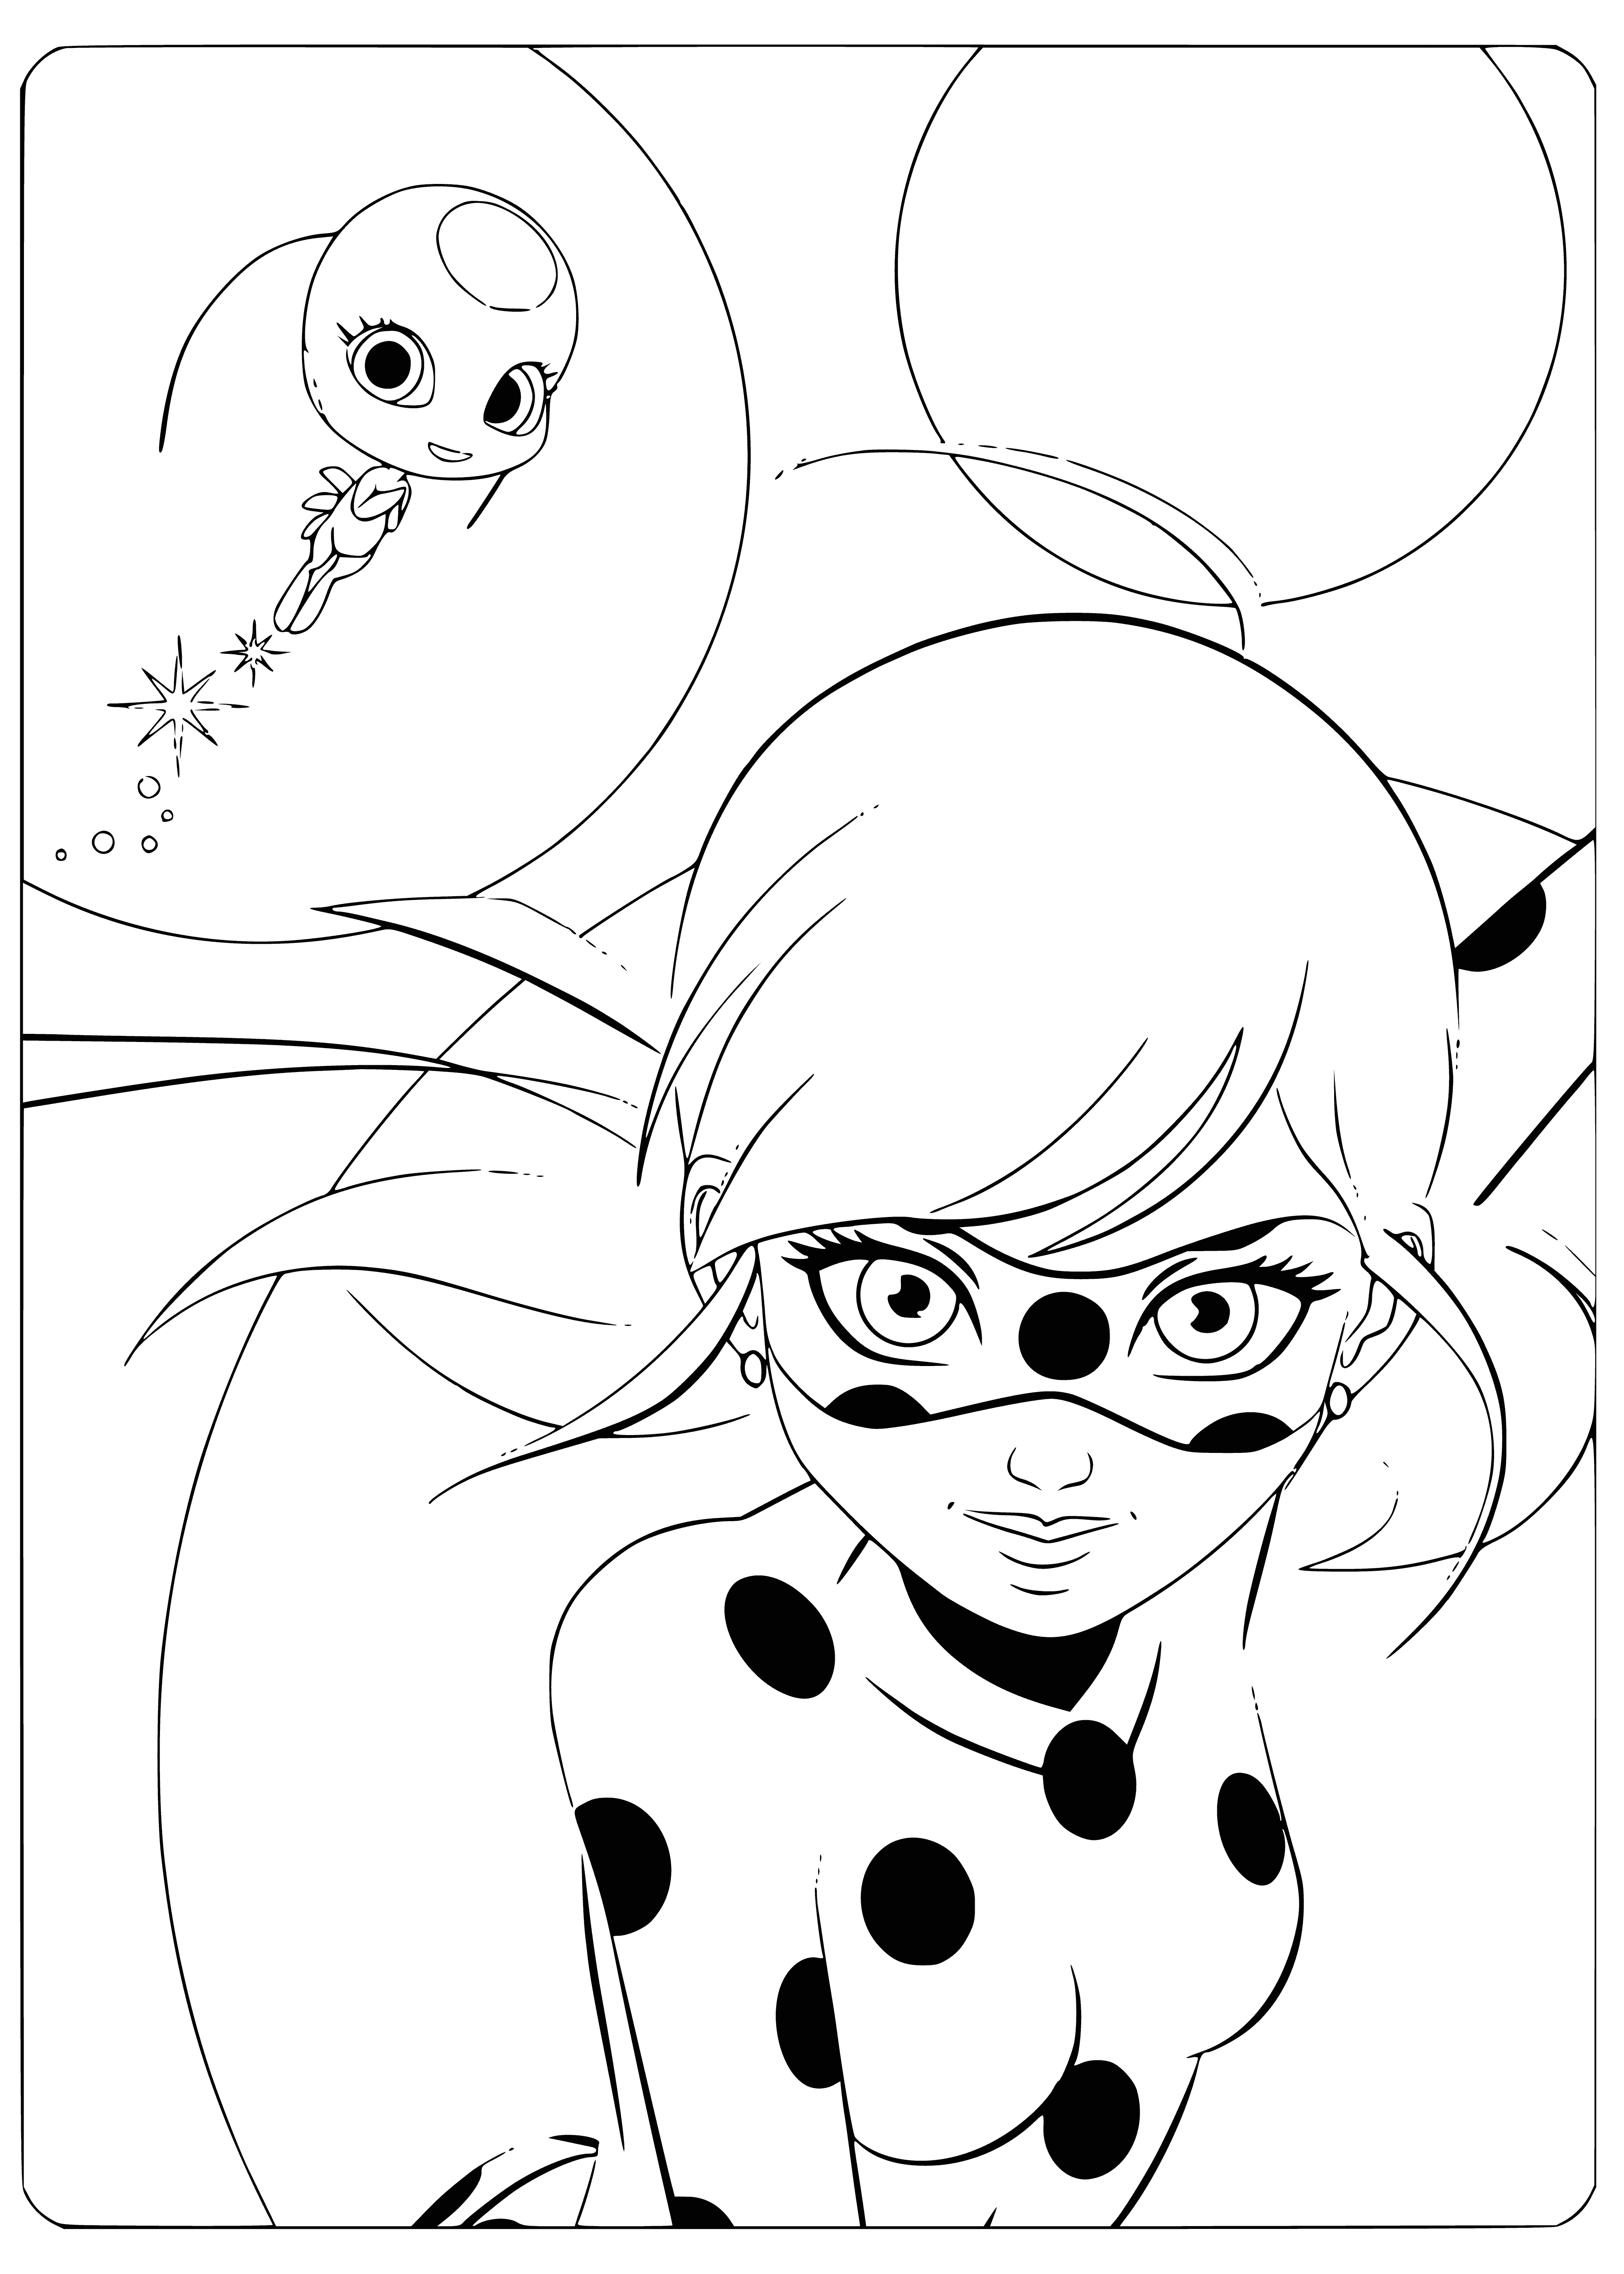 Lady Bug and Tikki coloring page